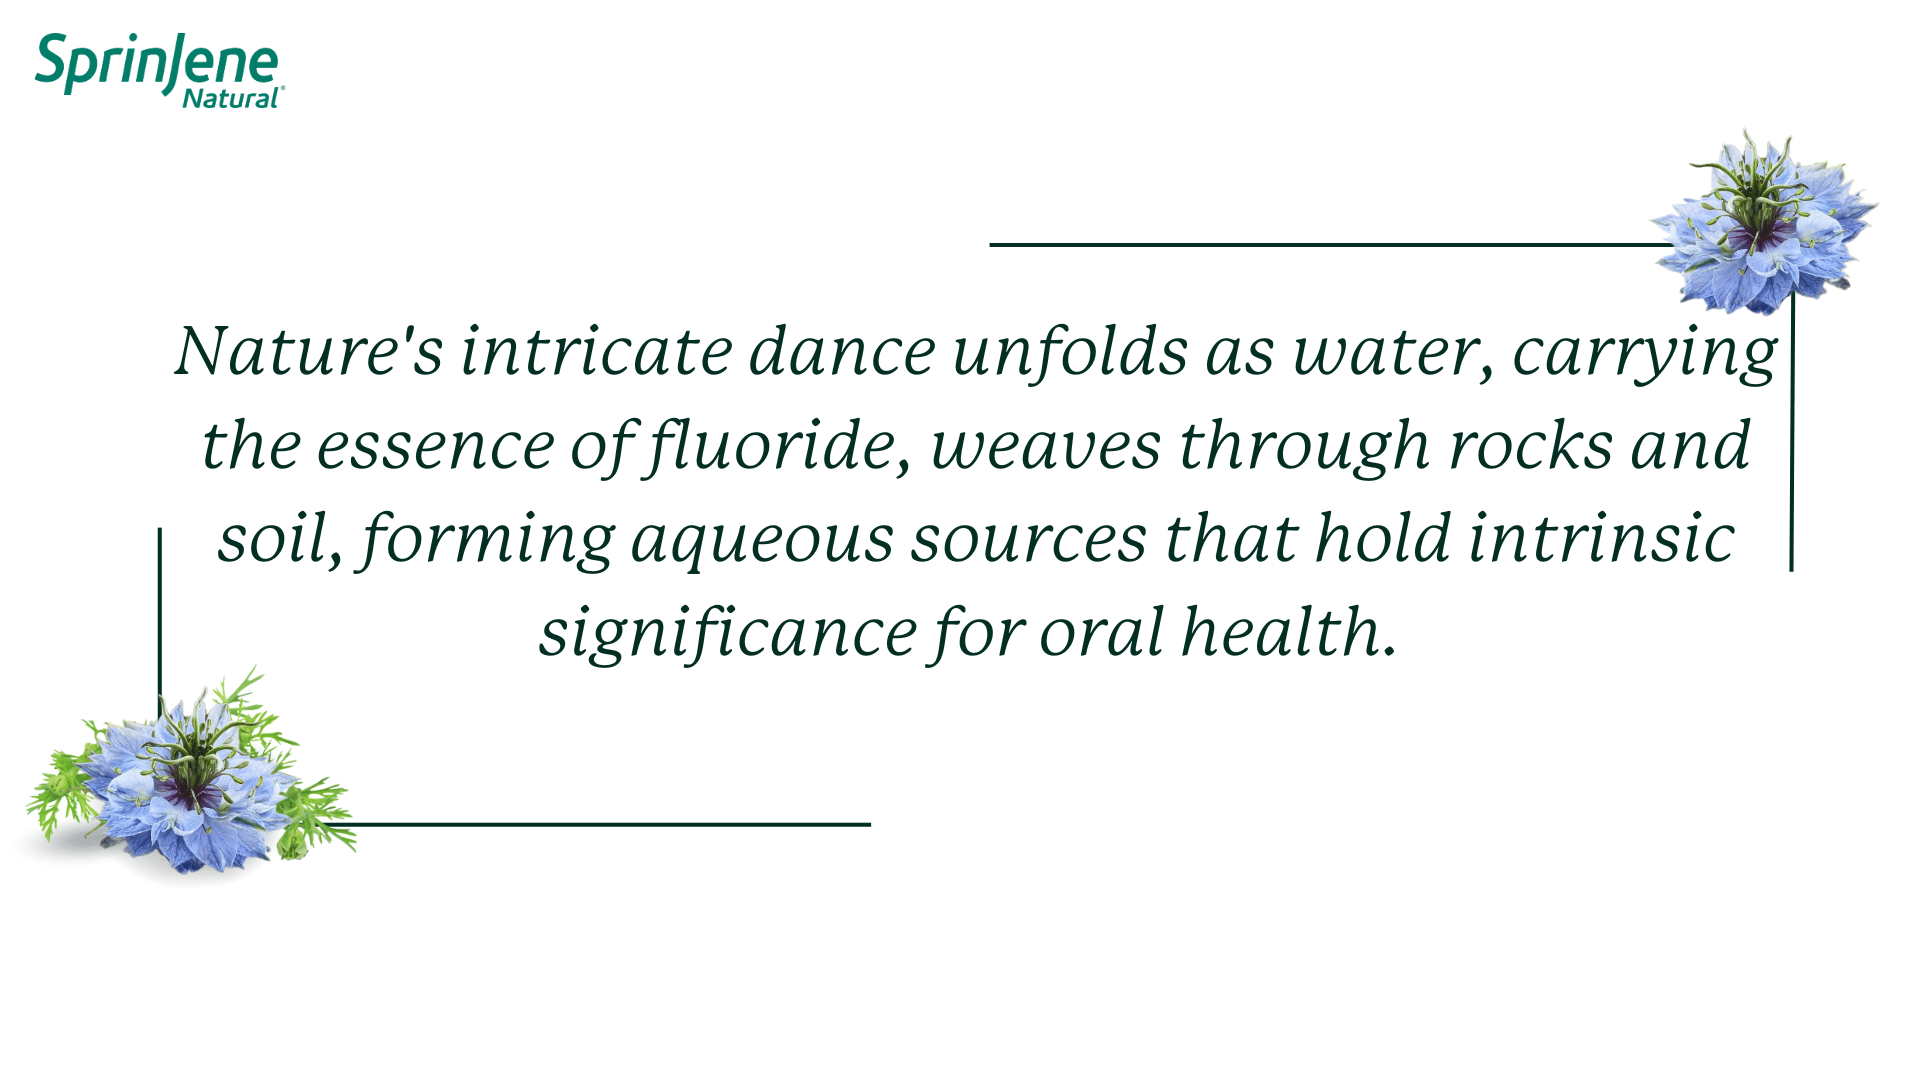 Nature's intricate dance unfolds as water, carrying the essence of fluoride, weaves through rocks and soil, forming aqueous sources that hold intrinsic significance for oral health.